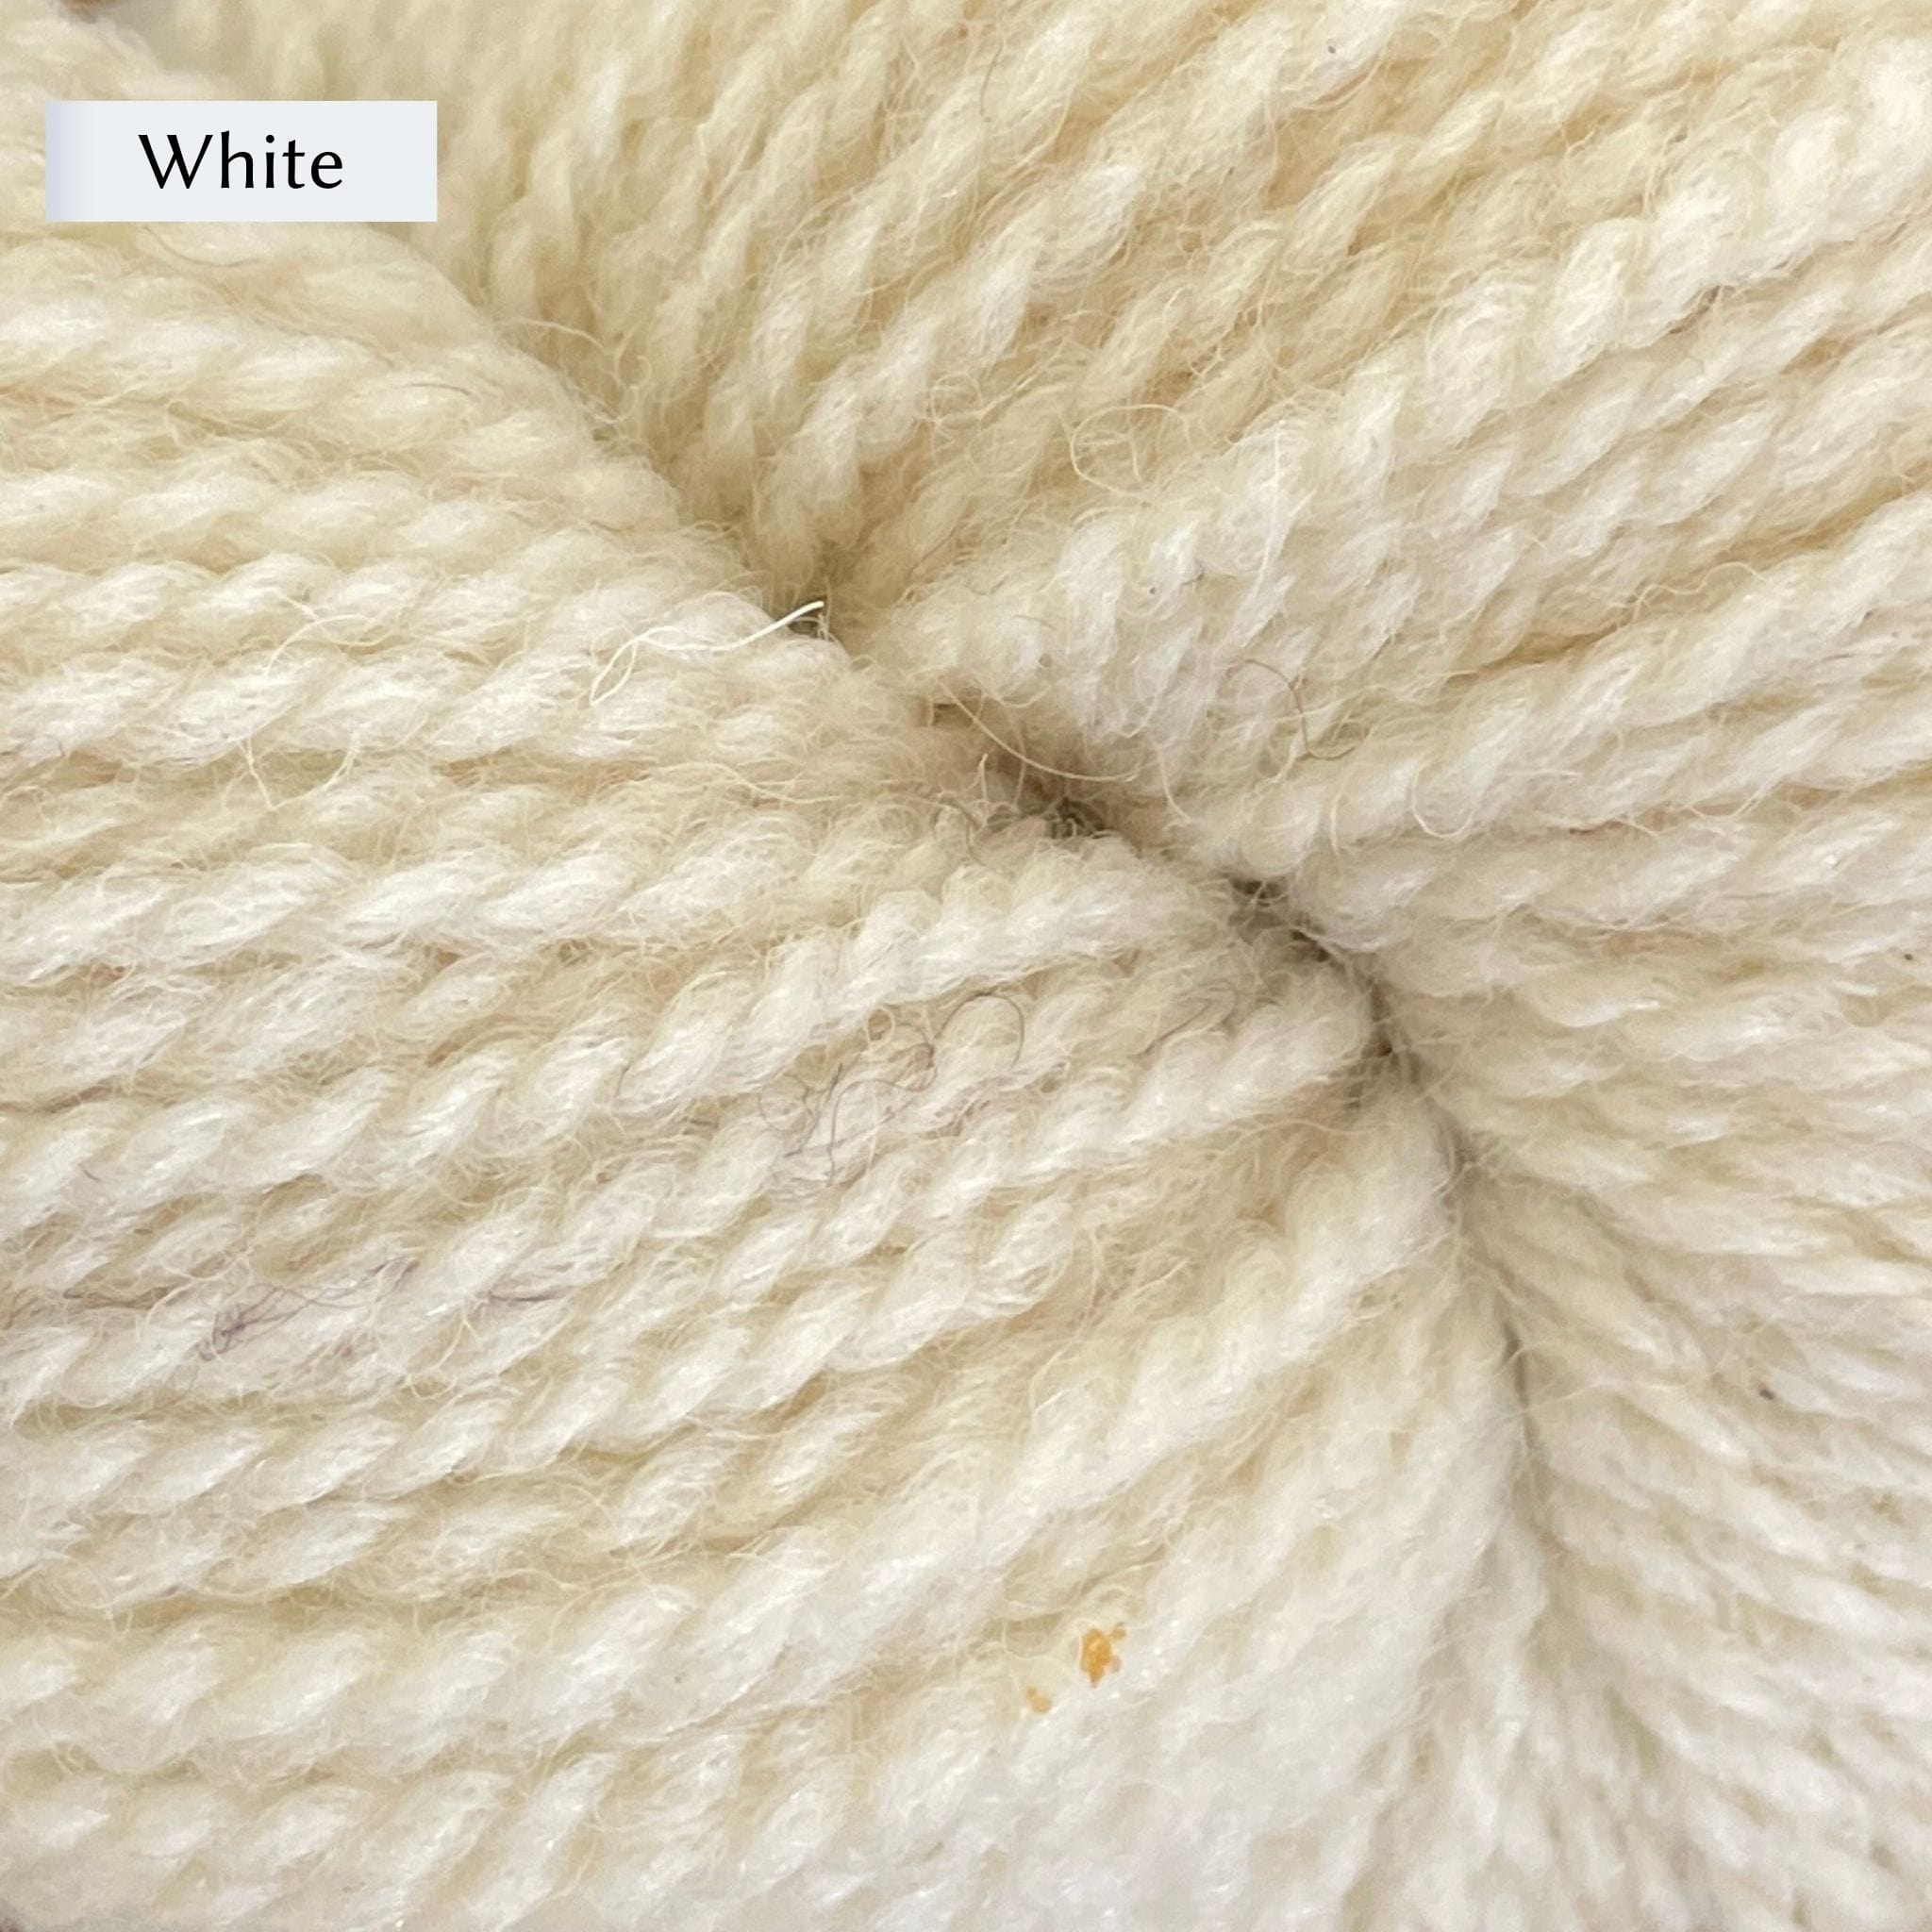 Junction Fiber Mill Farm Fresh yarn, DK weight, in color White, a natural cream